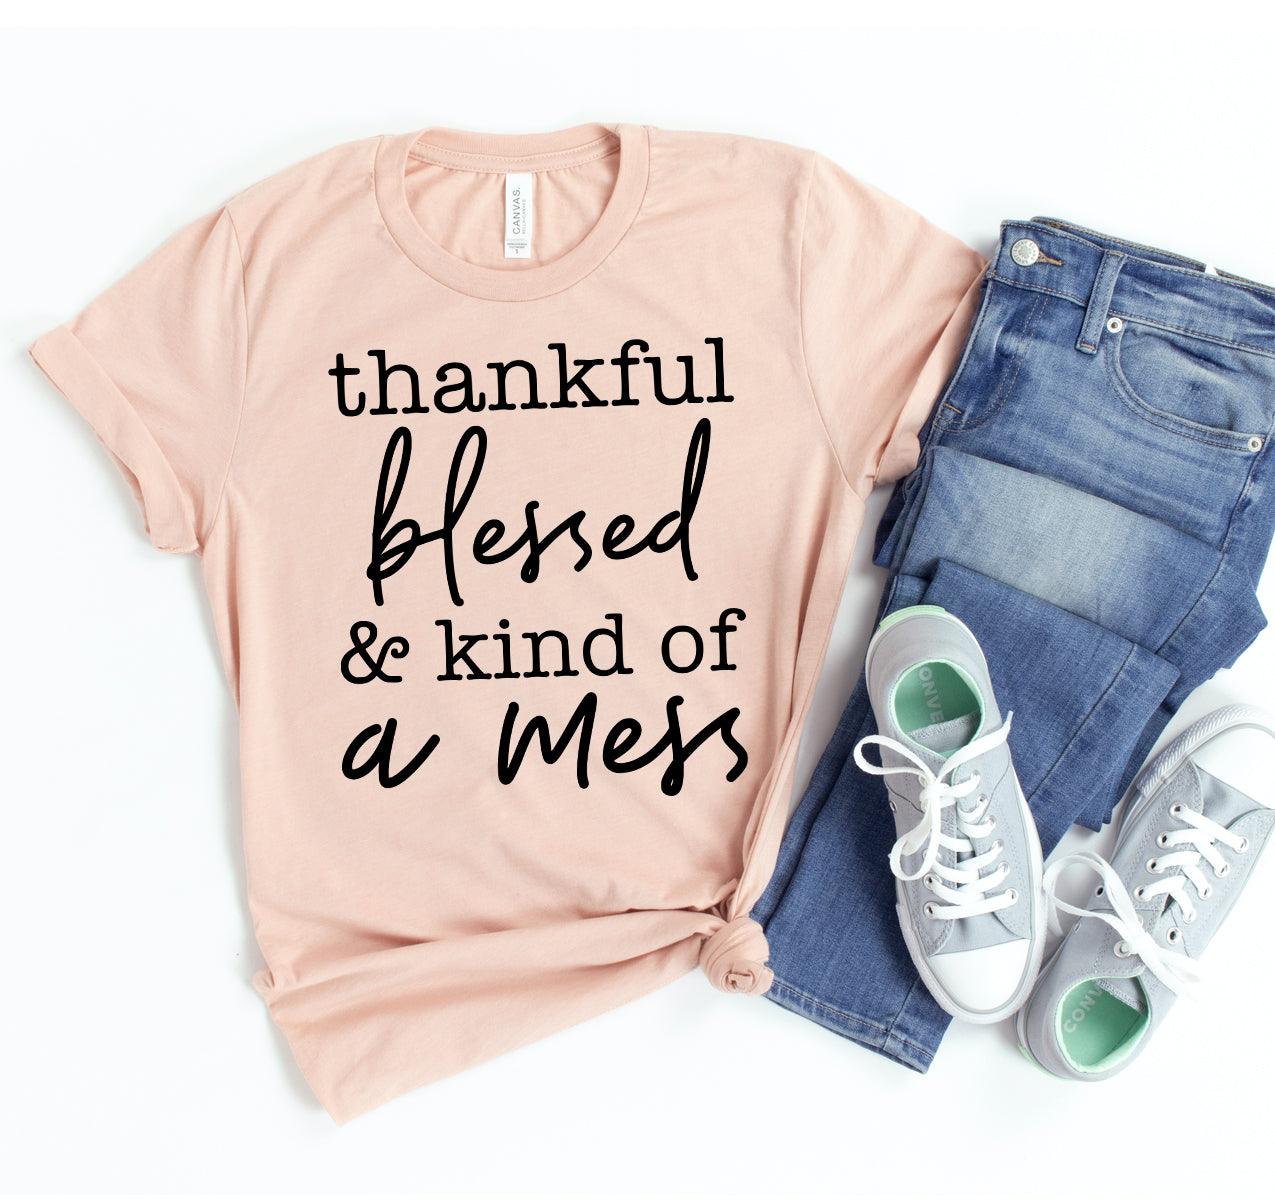 Thankful Blessed & Kind Of a Mess T-shirt - VirtuousWares:Global